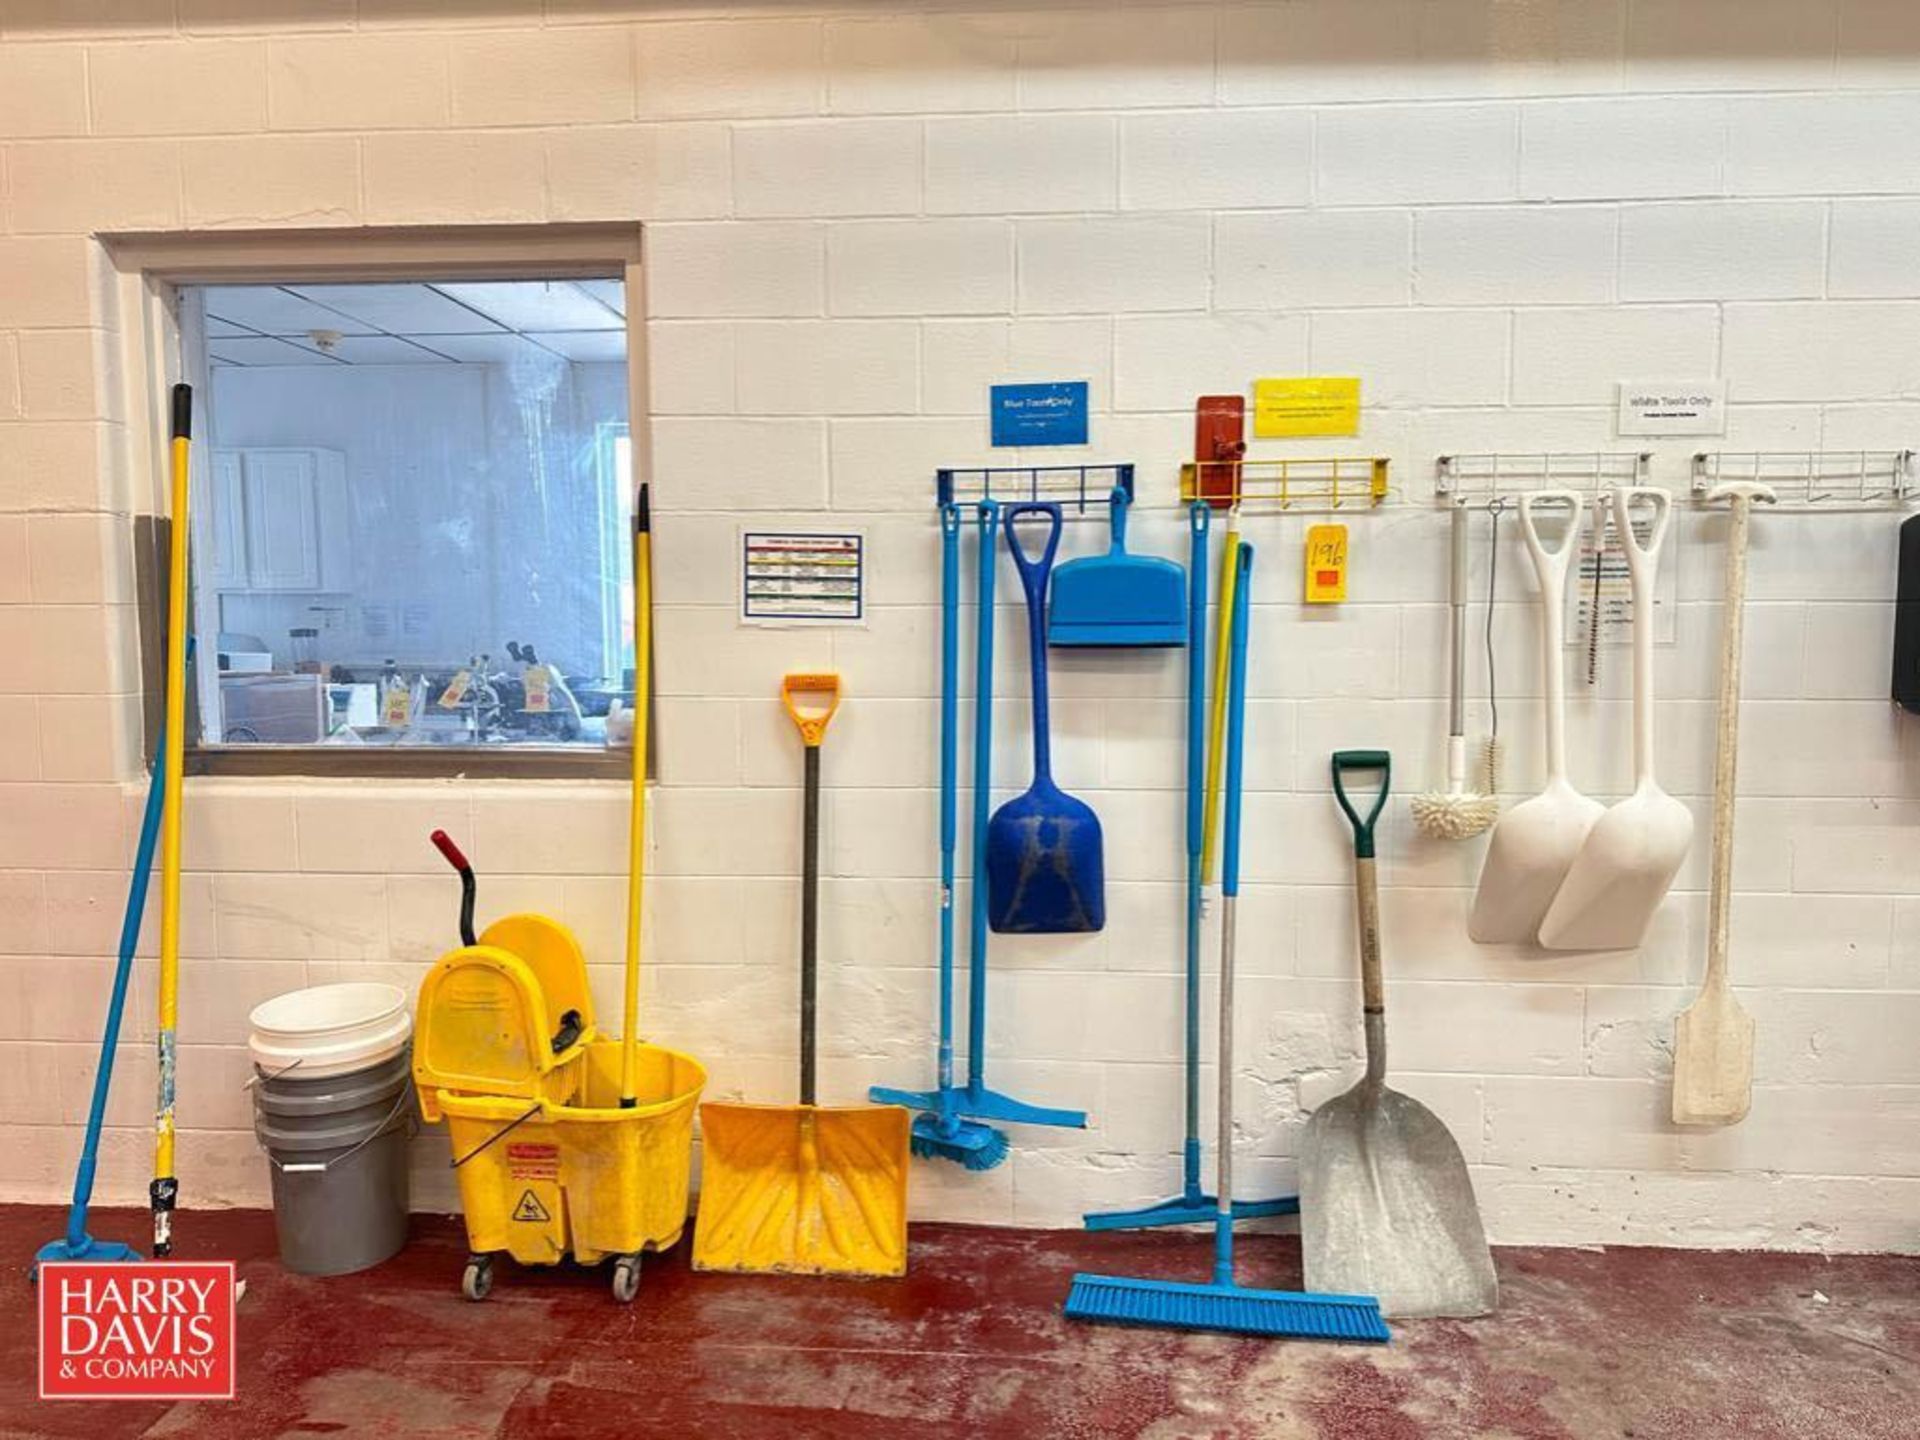 (4) Wall-Mounted Utility Racks with Assorted Shovels, Brooms and Dust Pans